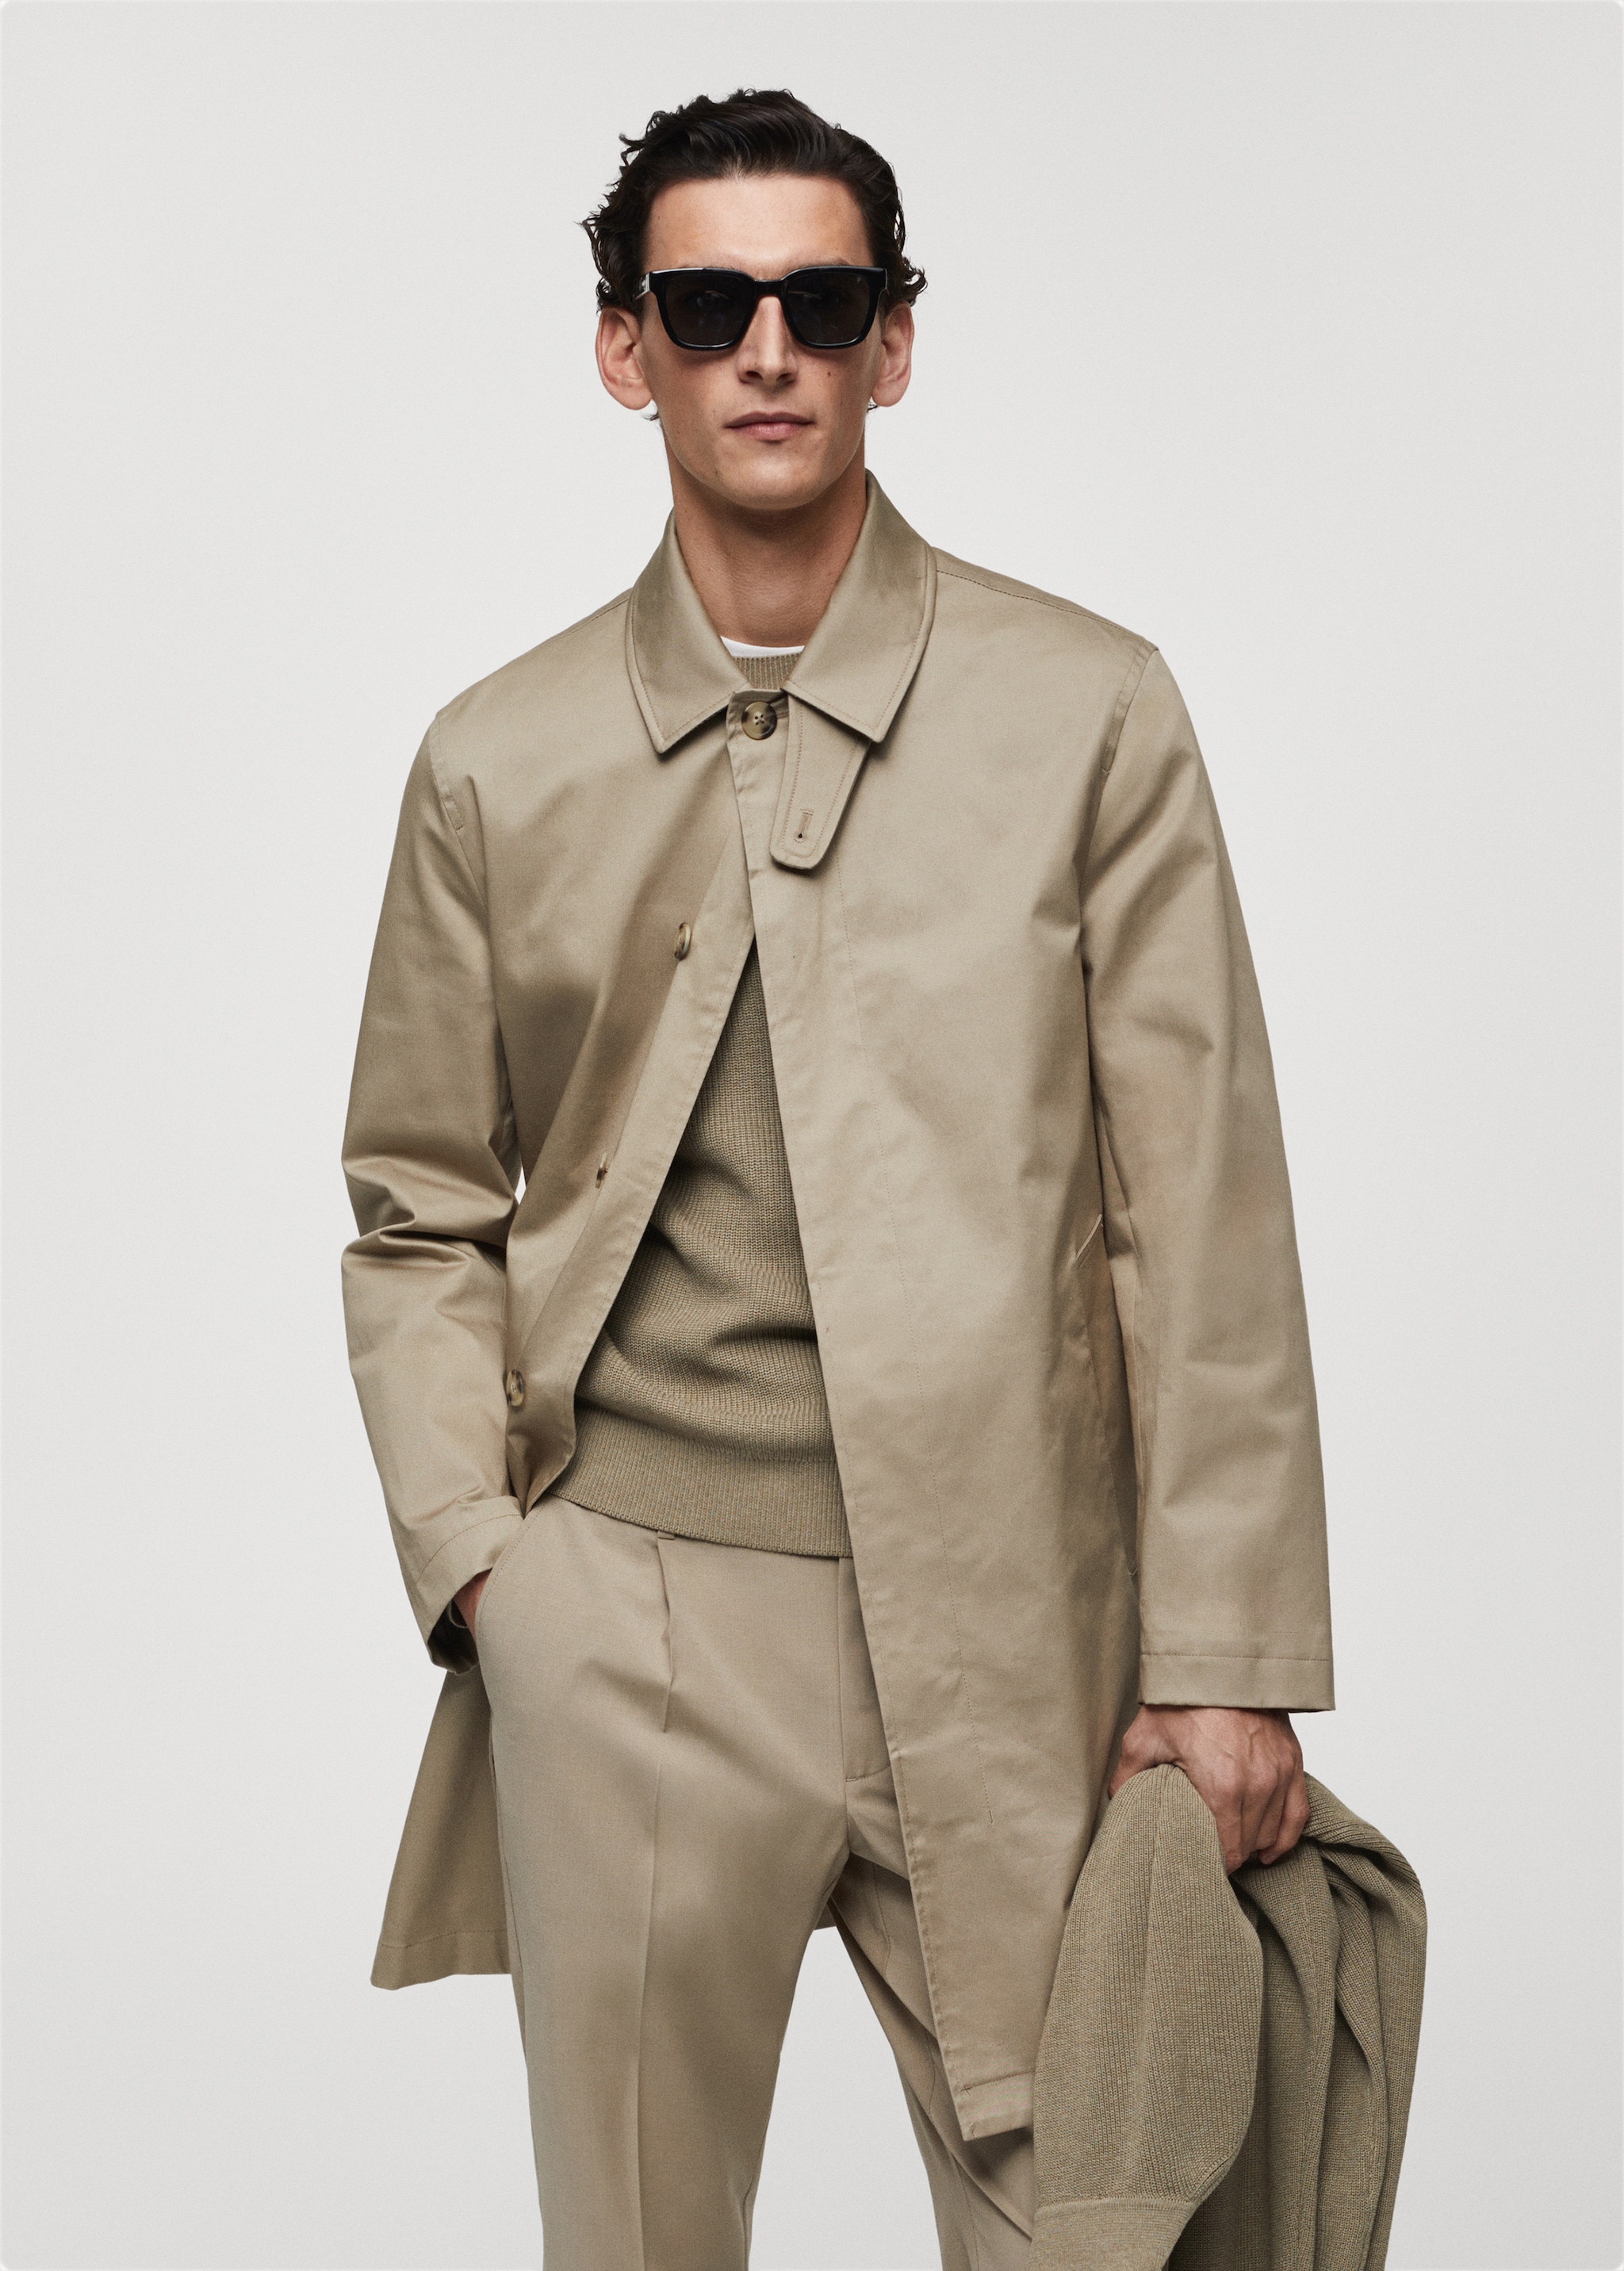 Cotton trench coat with collar detail - Medium plane